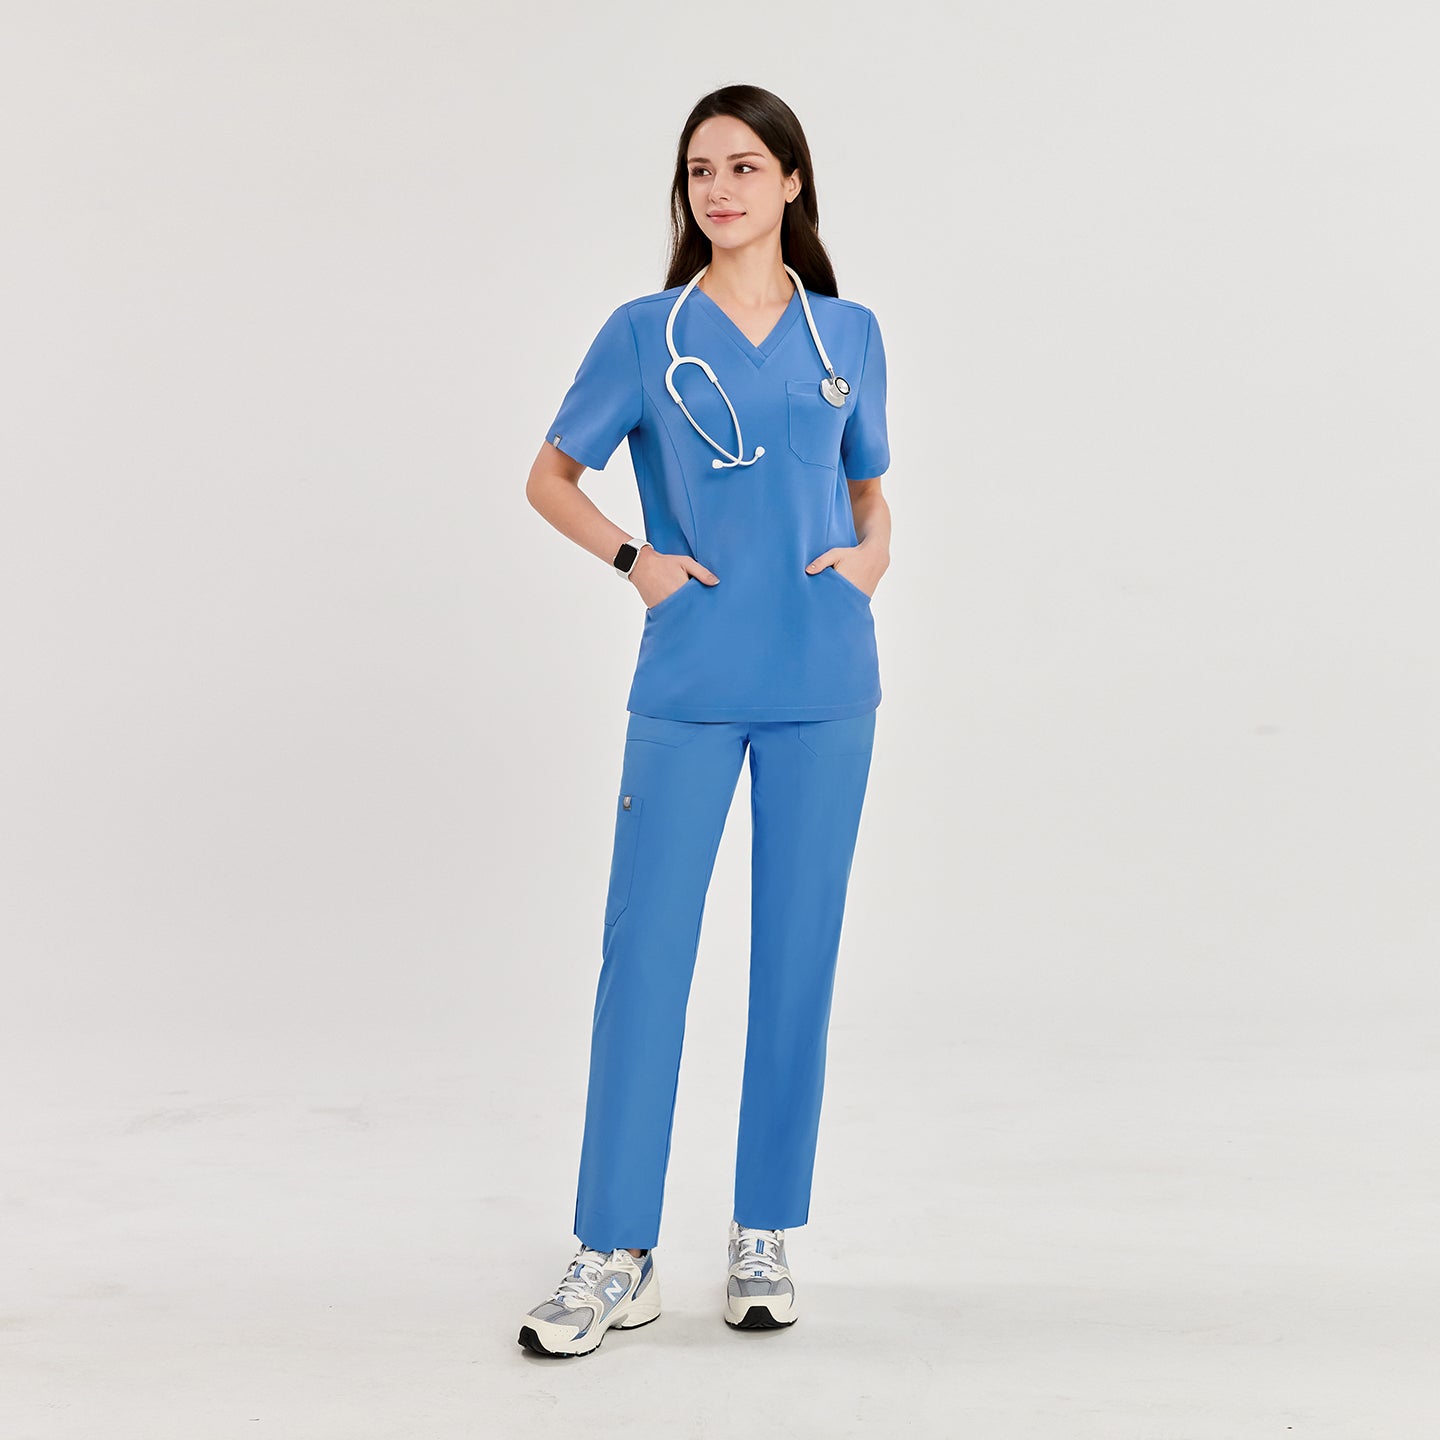 Woman wearing a sky blue scrub top and matching pants, with a stethoscope around her neck, hands in pockets, standing and looking to the side,Sky Blue